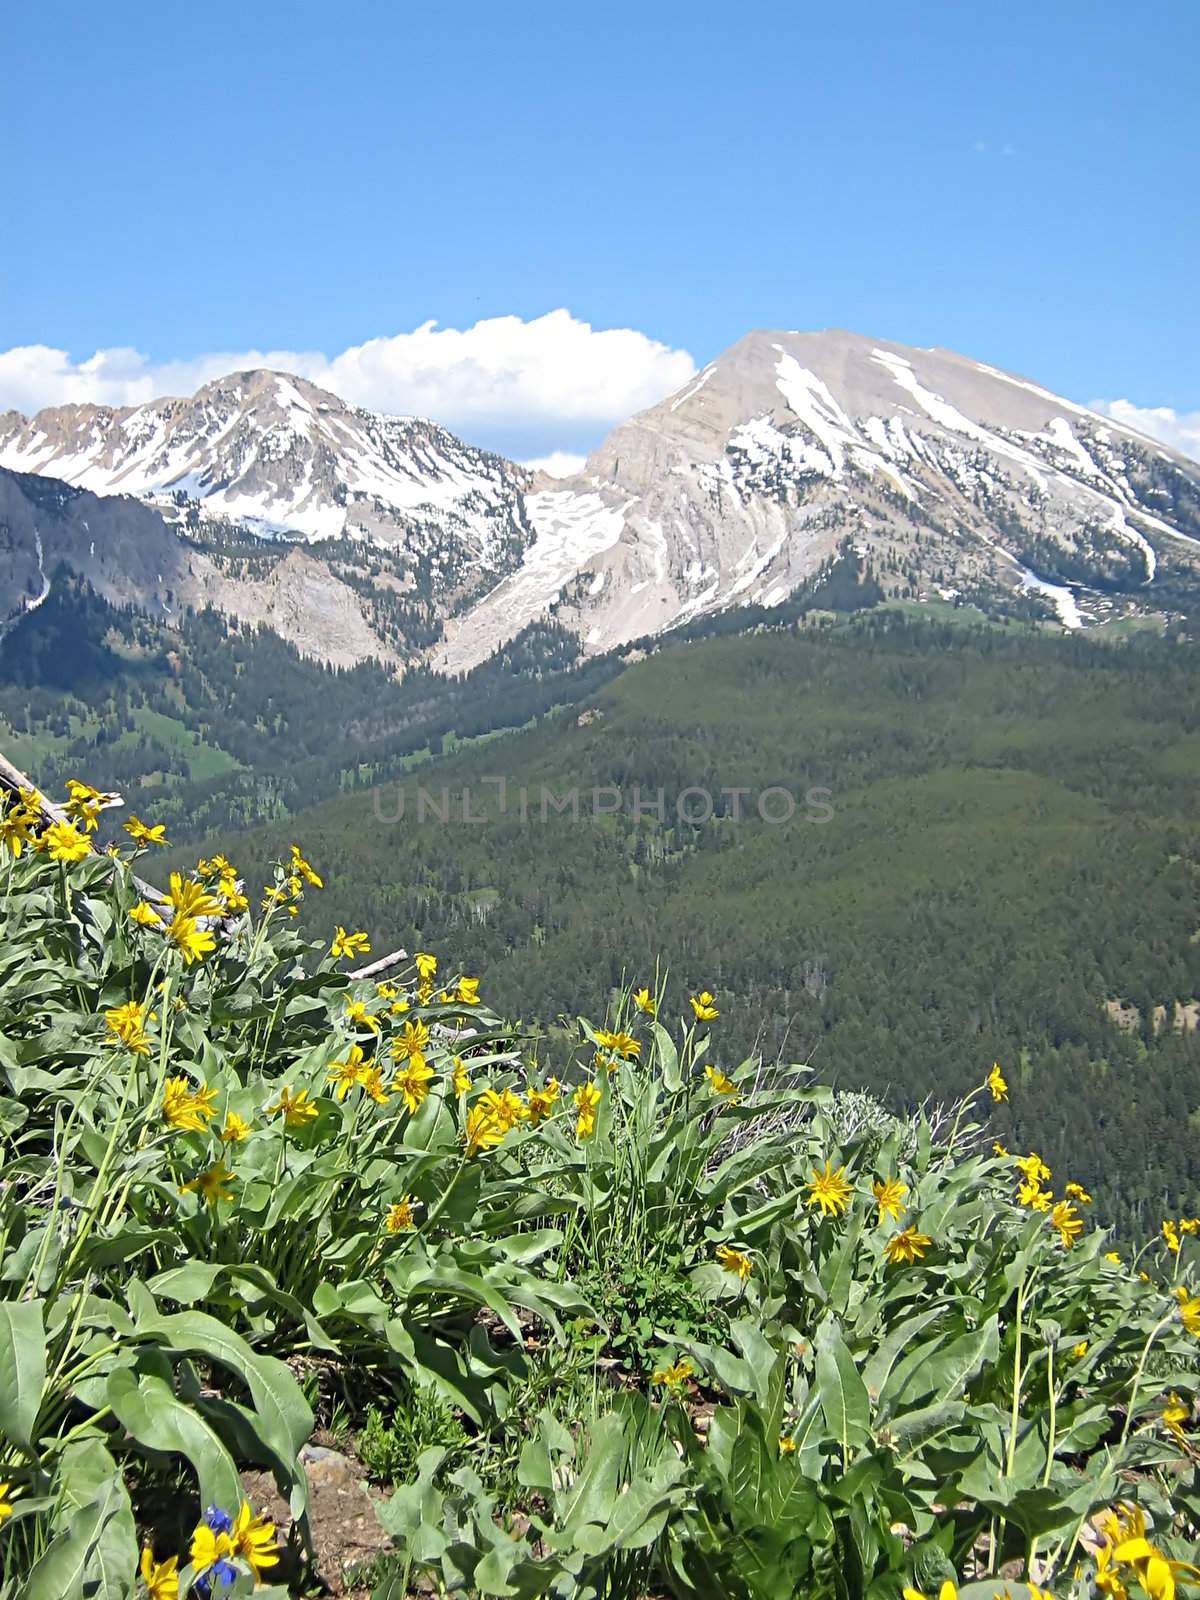 A photograph of flowers in the mountains.